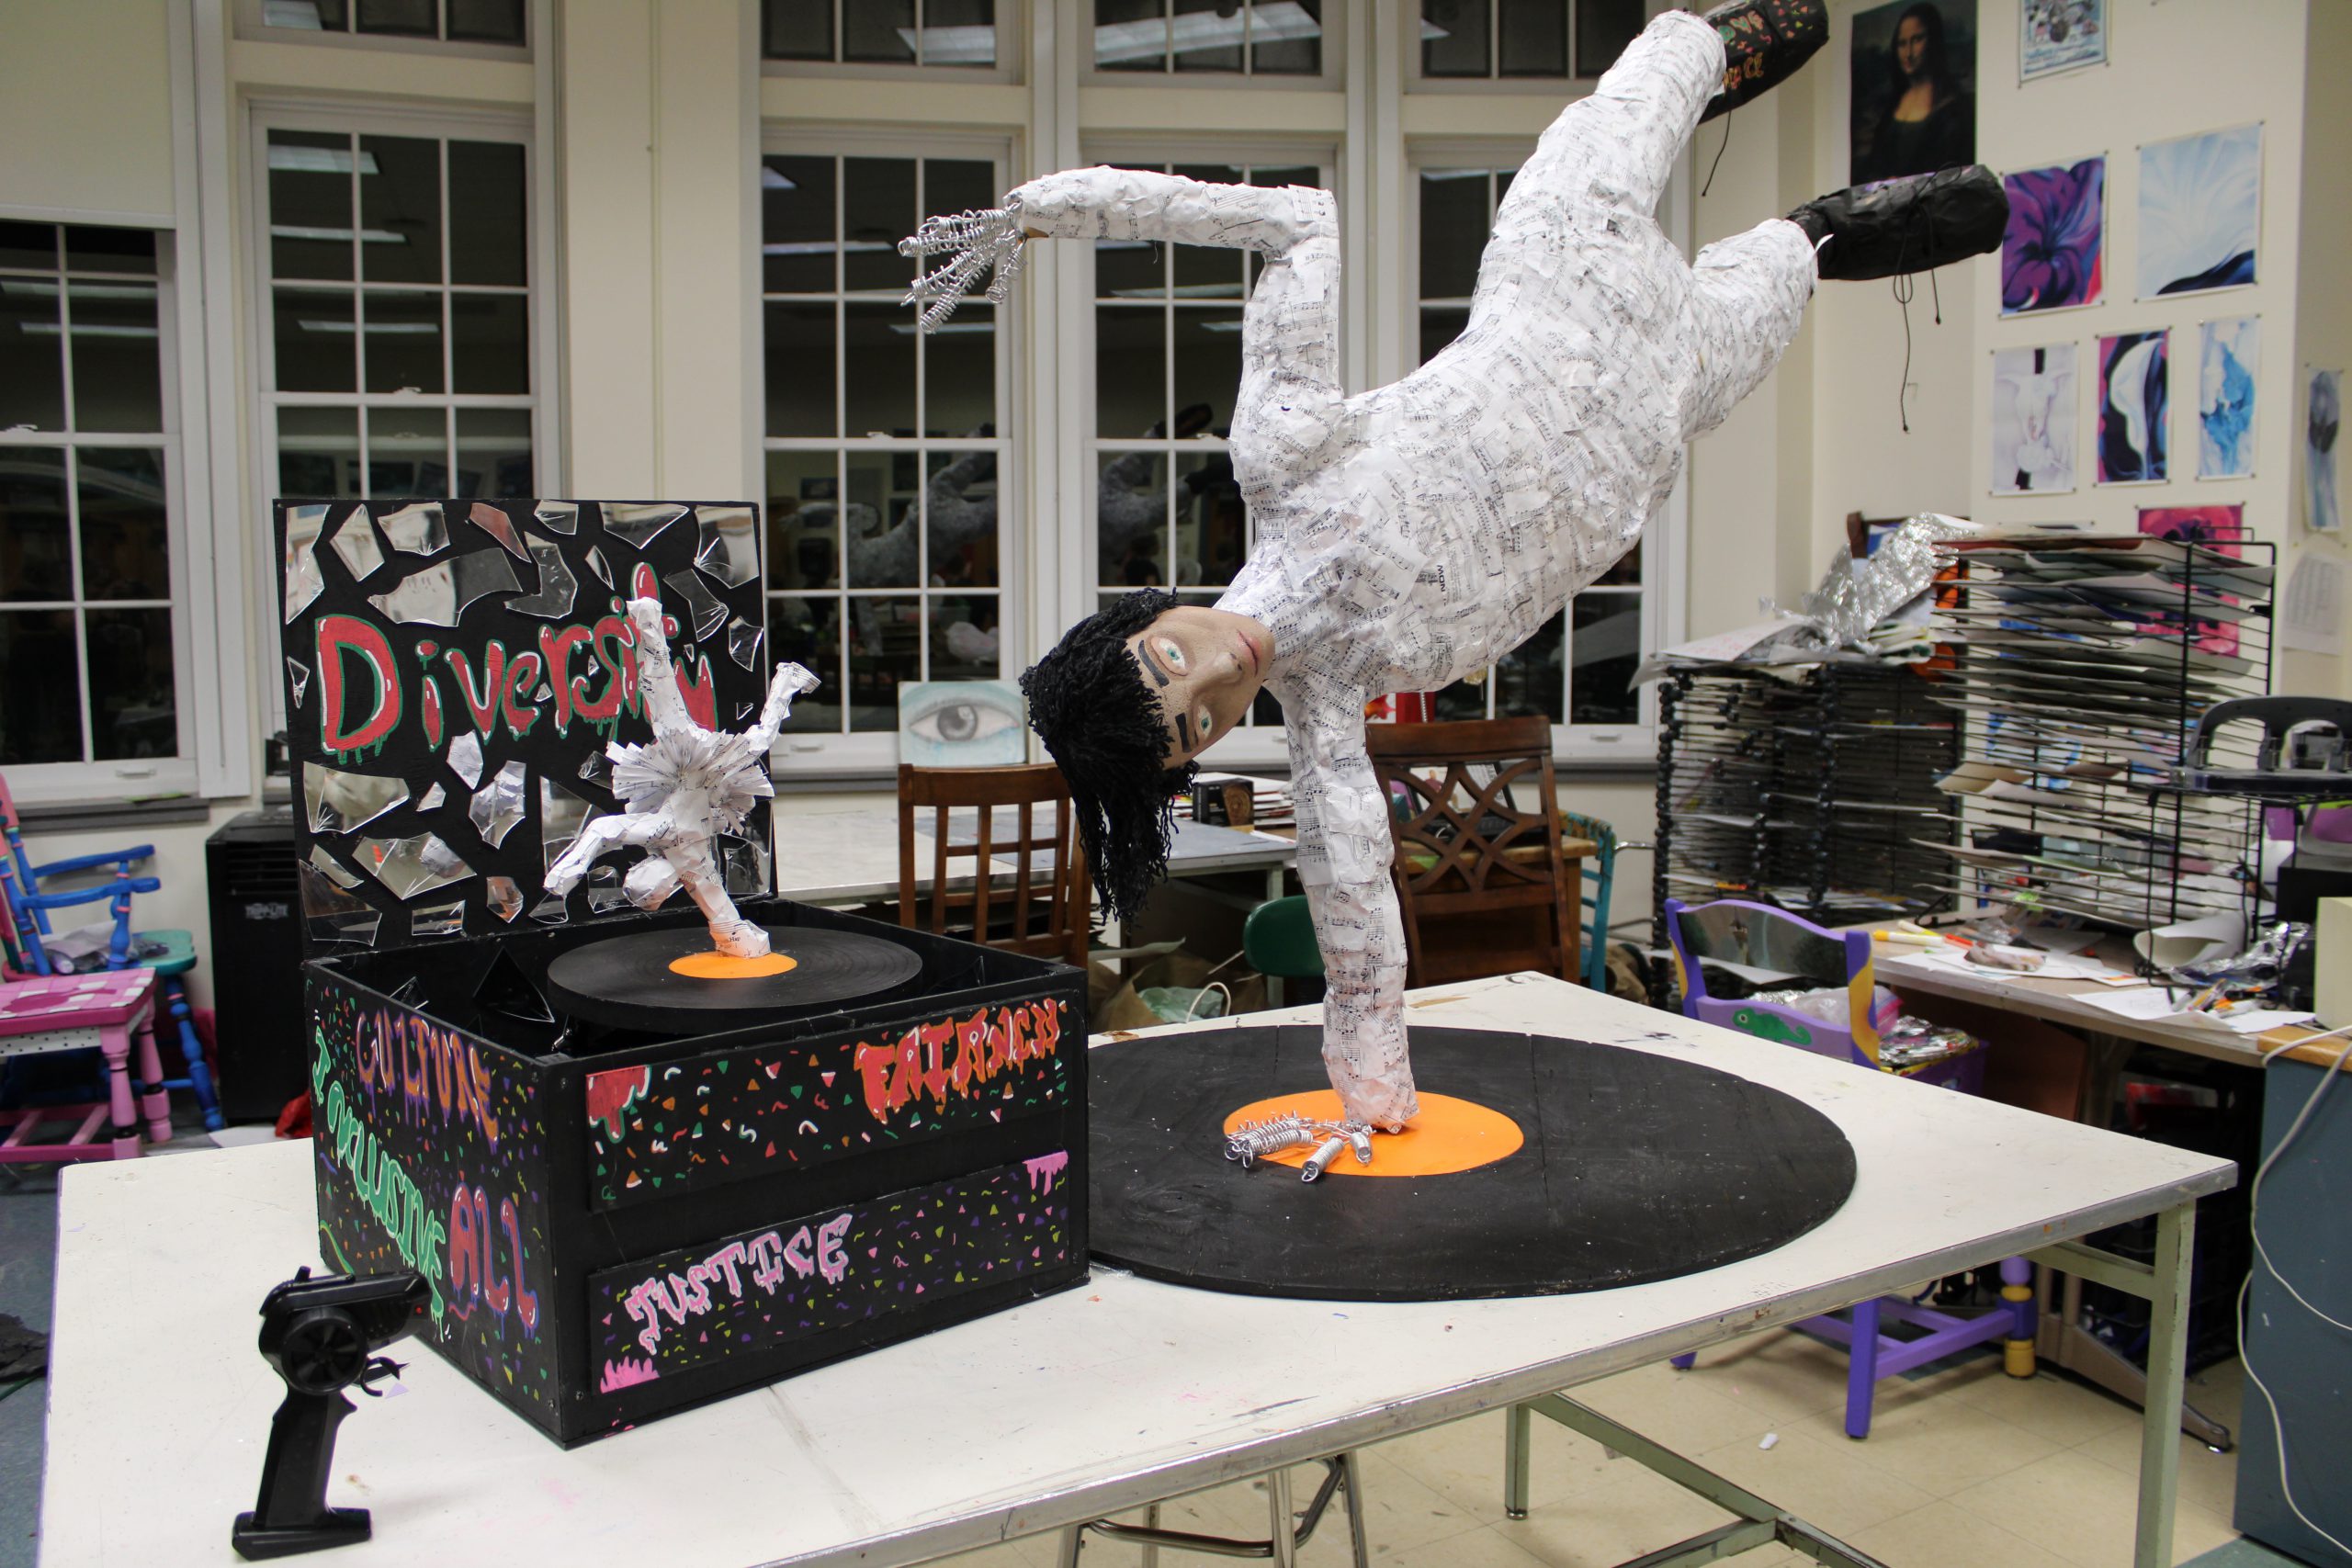 A papier mache sculpture of a person breakdancing on top of a black and orange vinyl record stands next to a miniature version of a person with no face in ballerina attire breakdancing on a record inside a black music box with glued pieces of mirrors and the text "Diversity" written across the top.